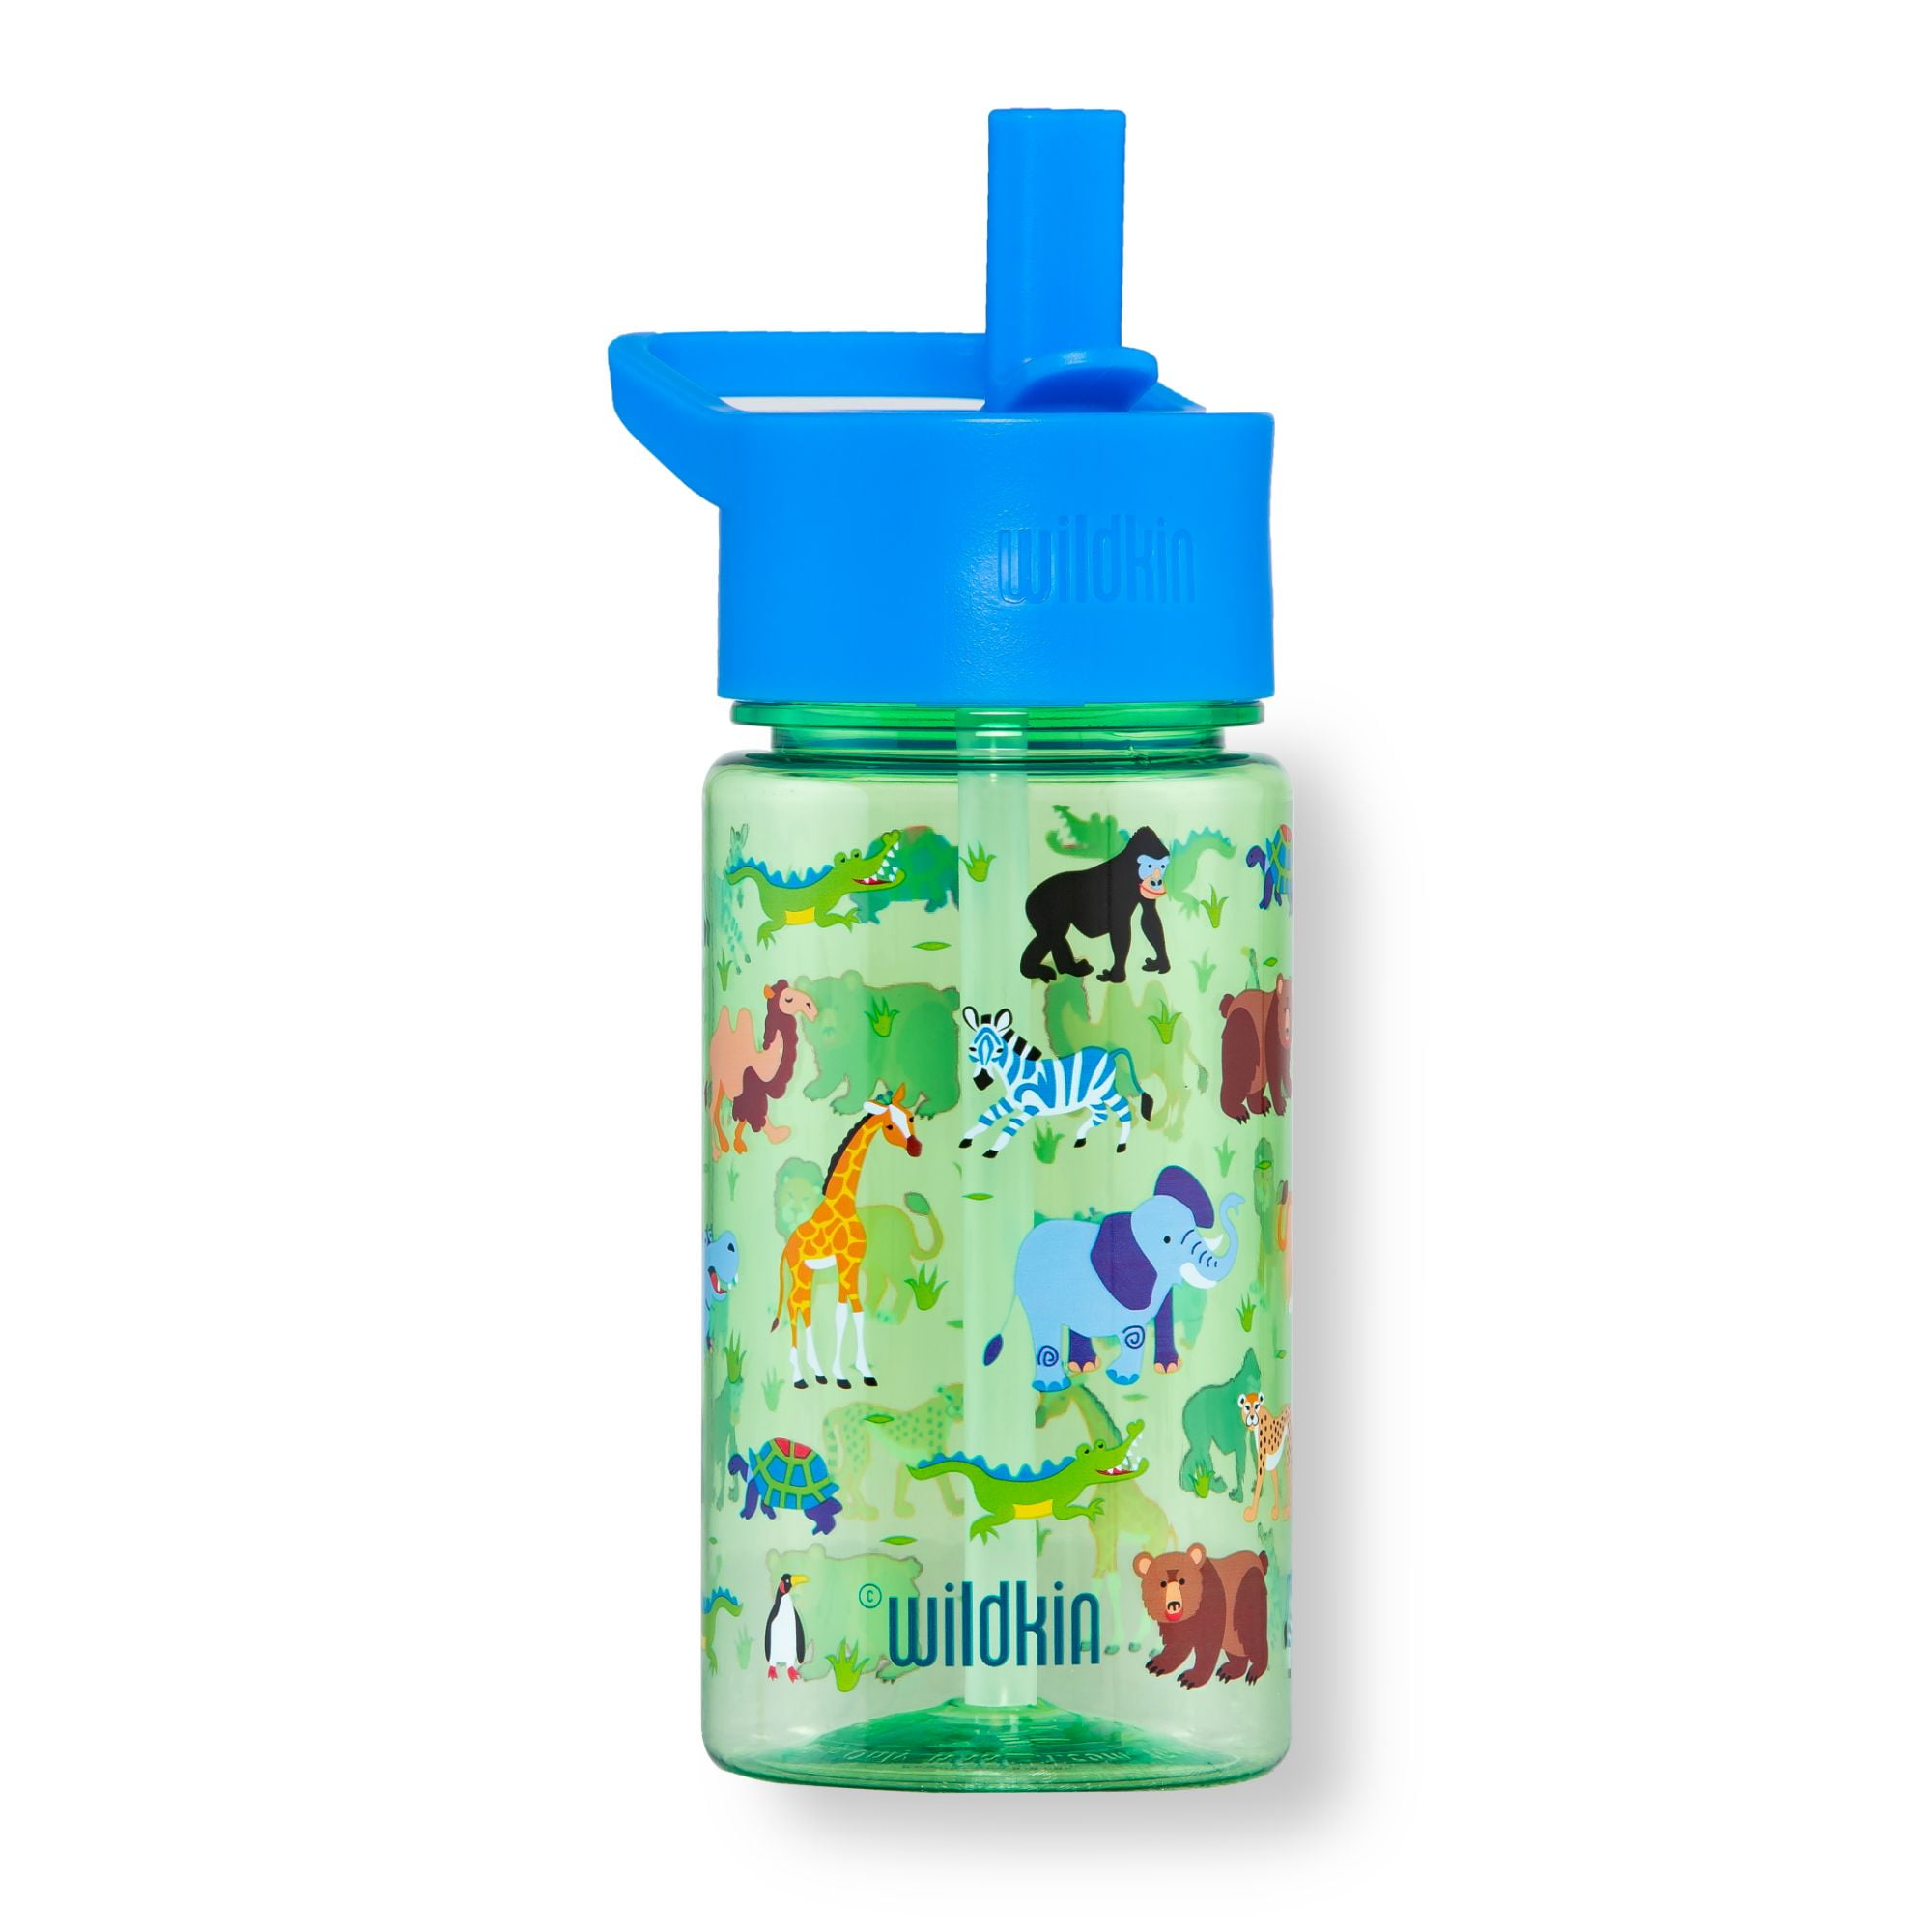 Wildkin Unicorn Water Bottle Gifts For The Rider Kids at Chagrin